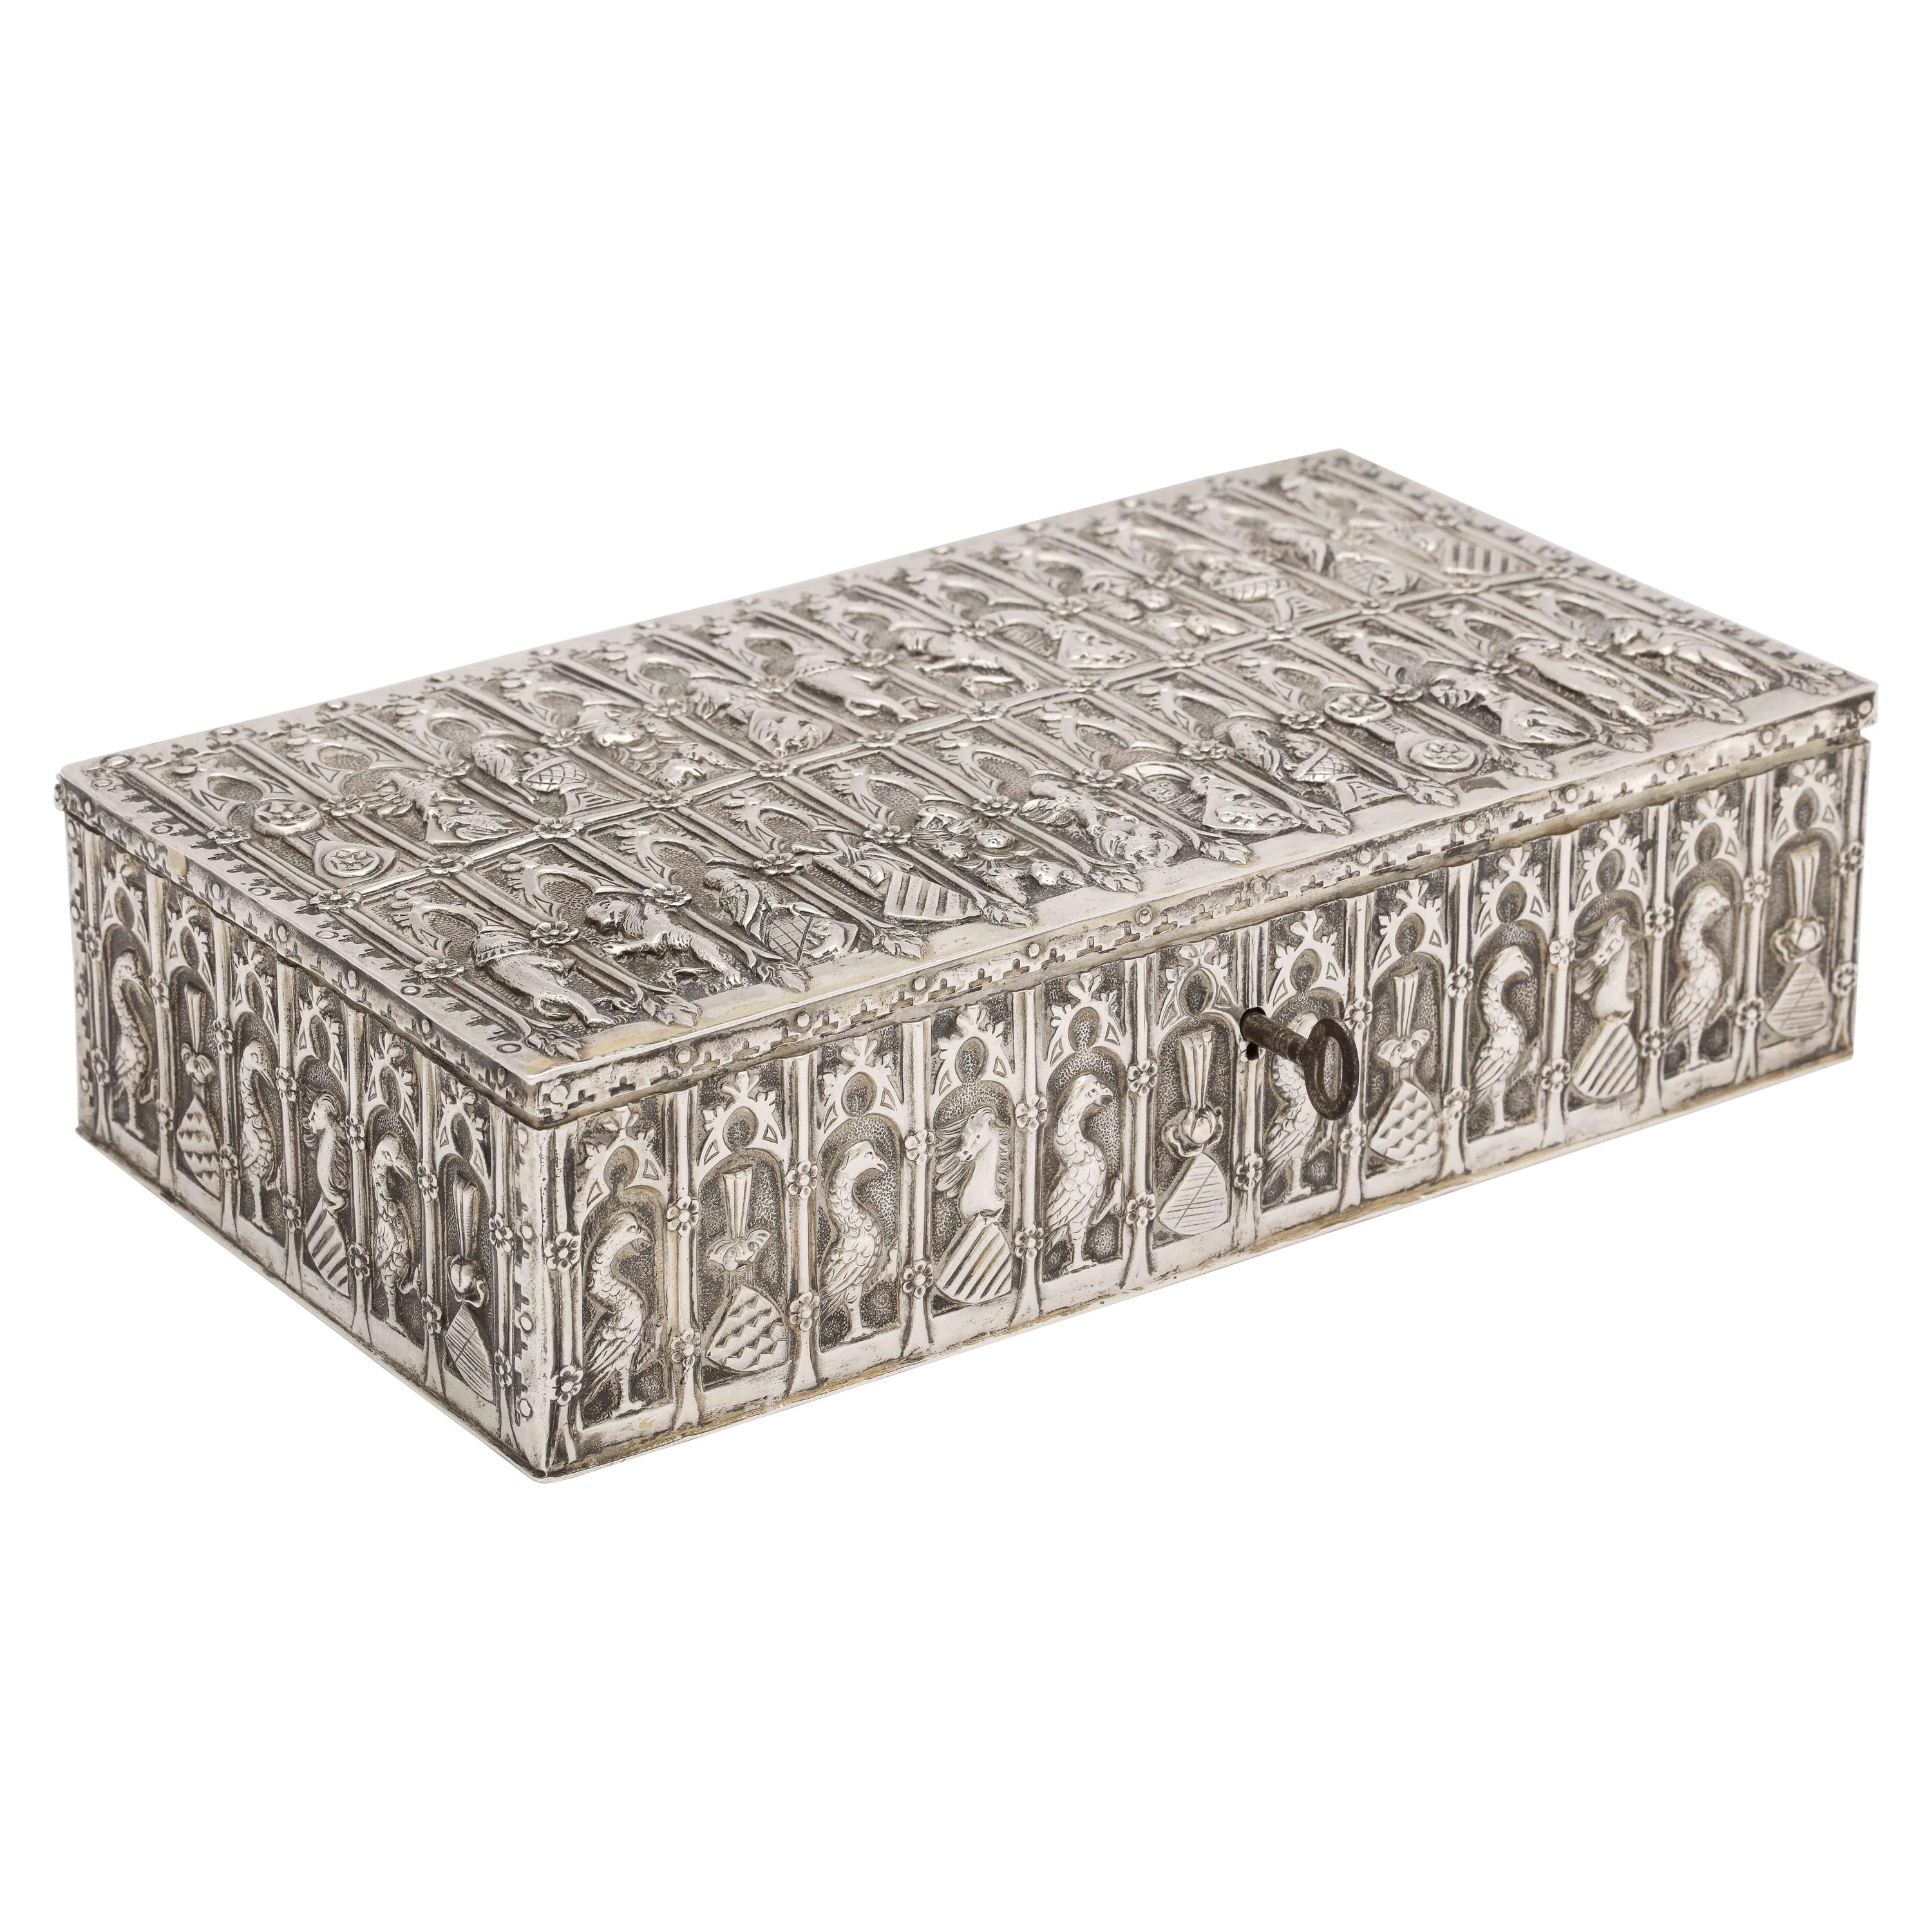 Medieval Style Continental Silver Jewelry Box